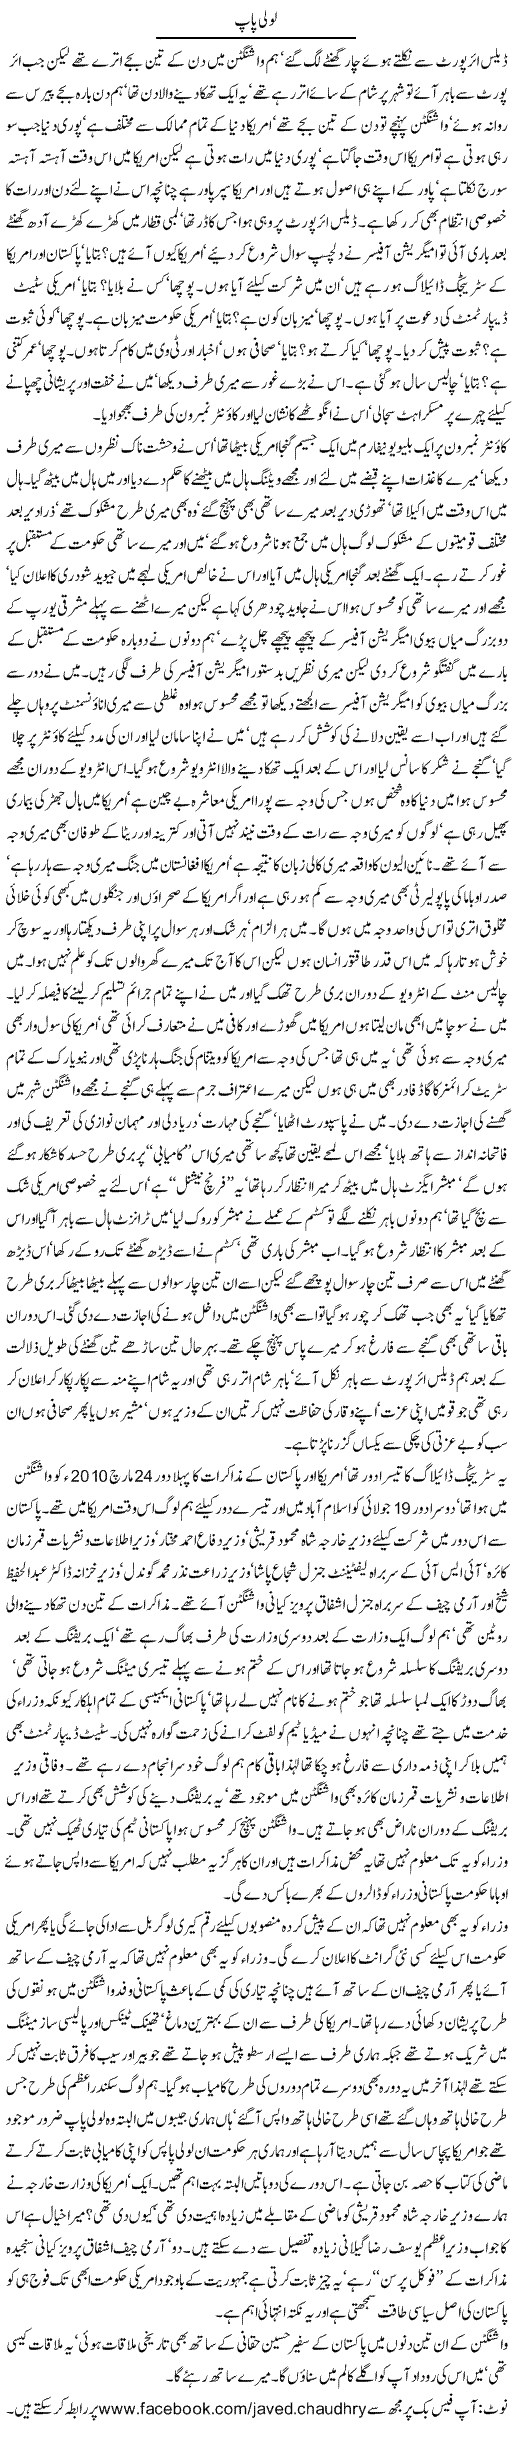 Lollipop Express Column Javed Chaudhry 26 October 2010